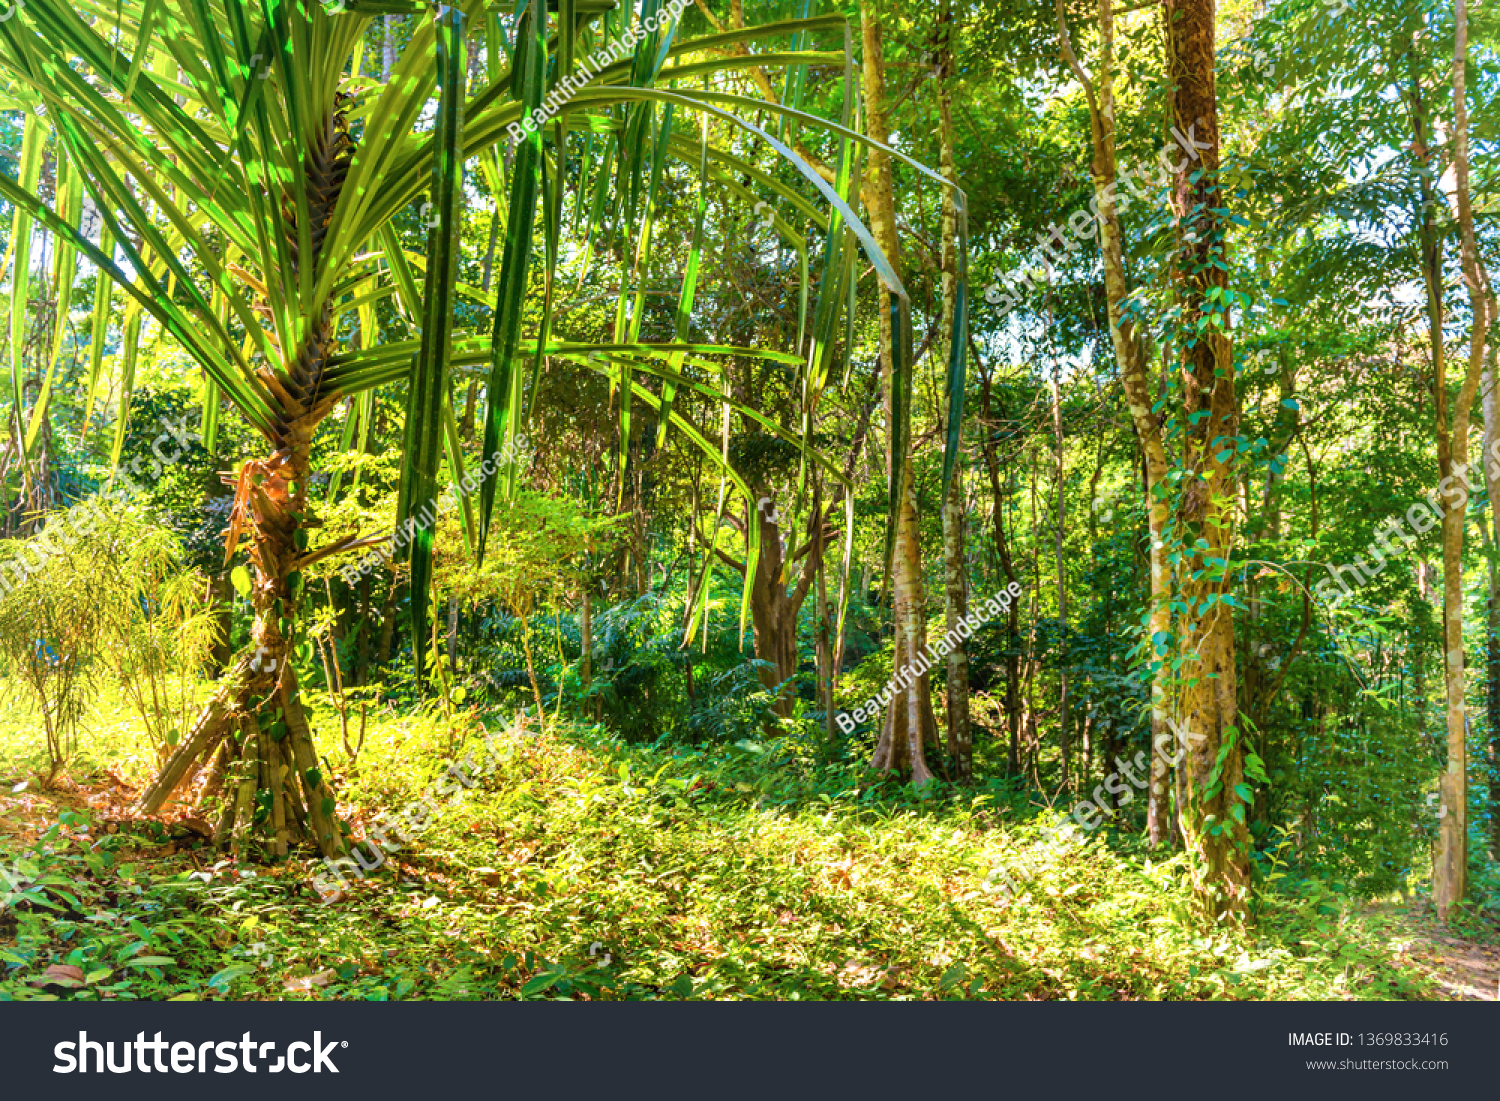 Nature landscape of tropical jungle forest with green lush foliage #1369833416